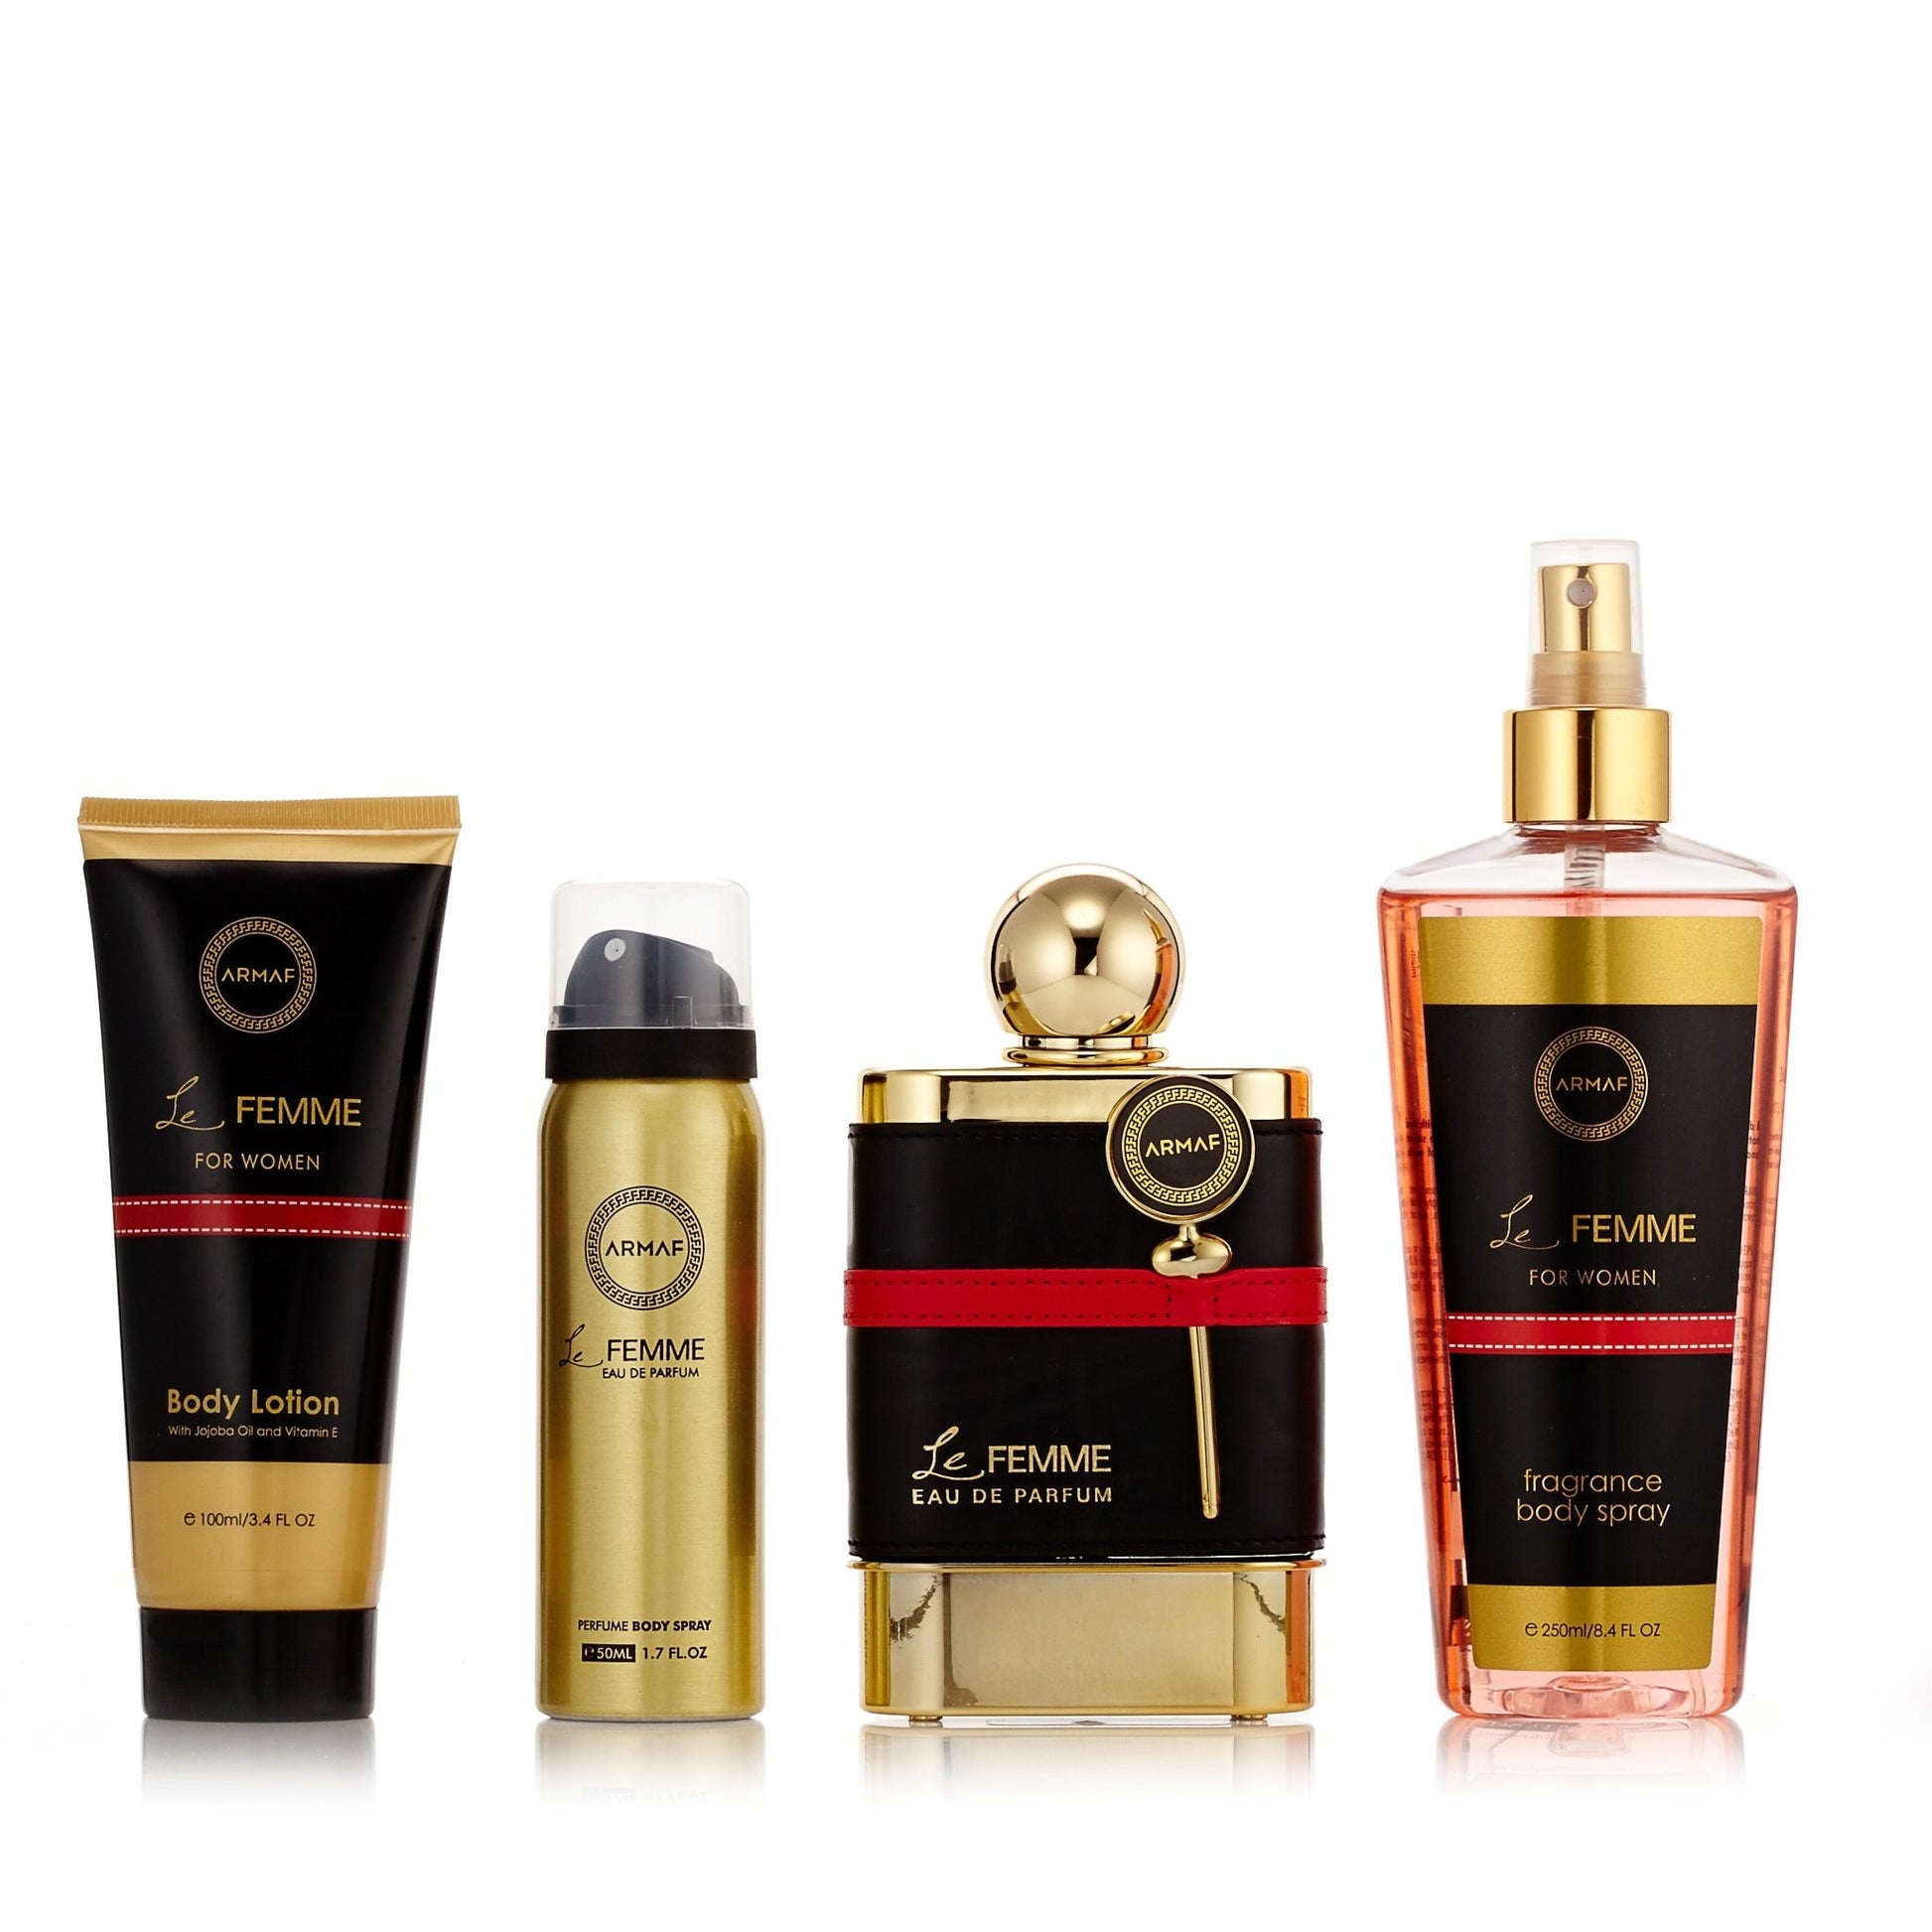 Le Femme Gift Set for Women 3.4 oz. Click to open in modal